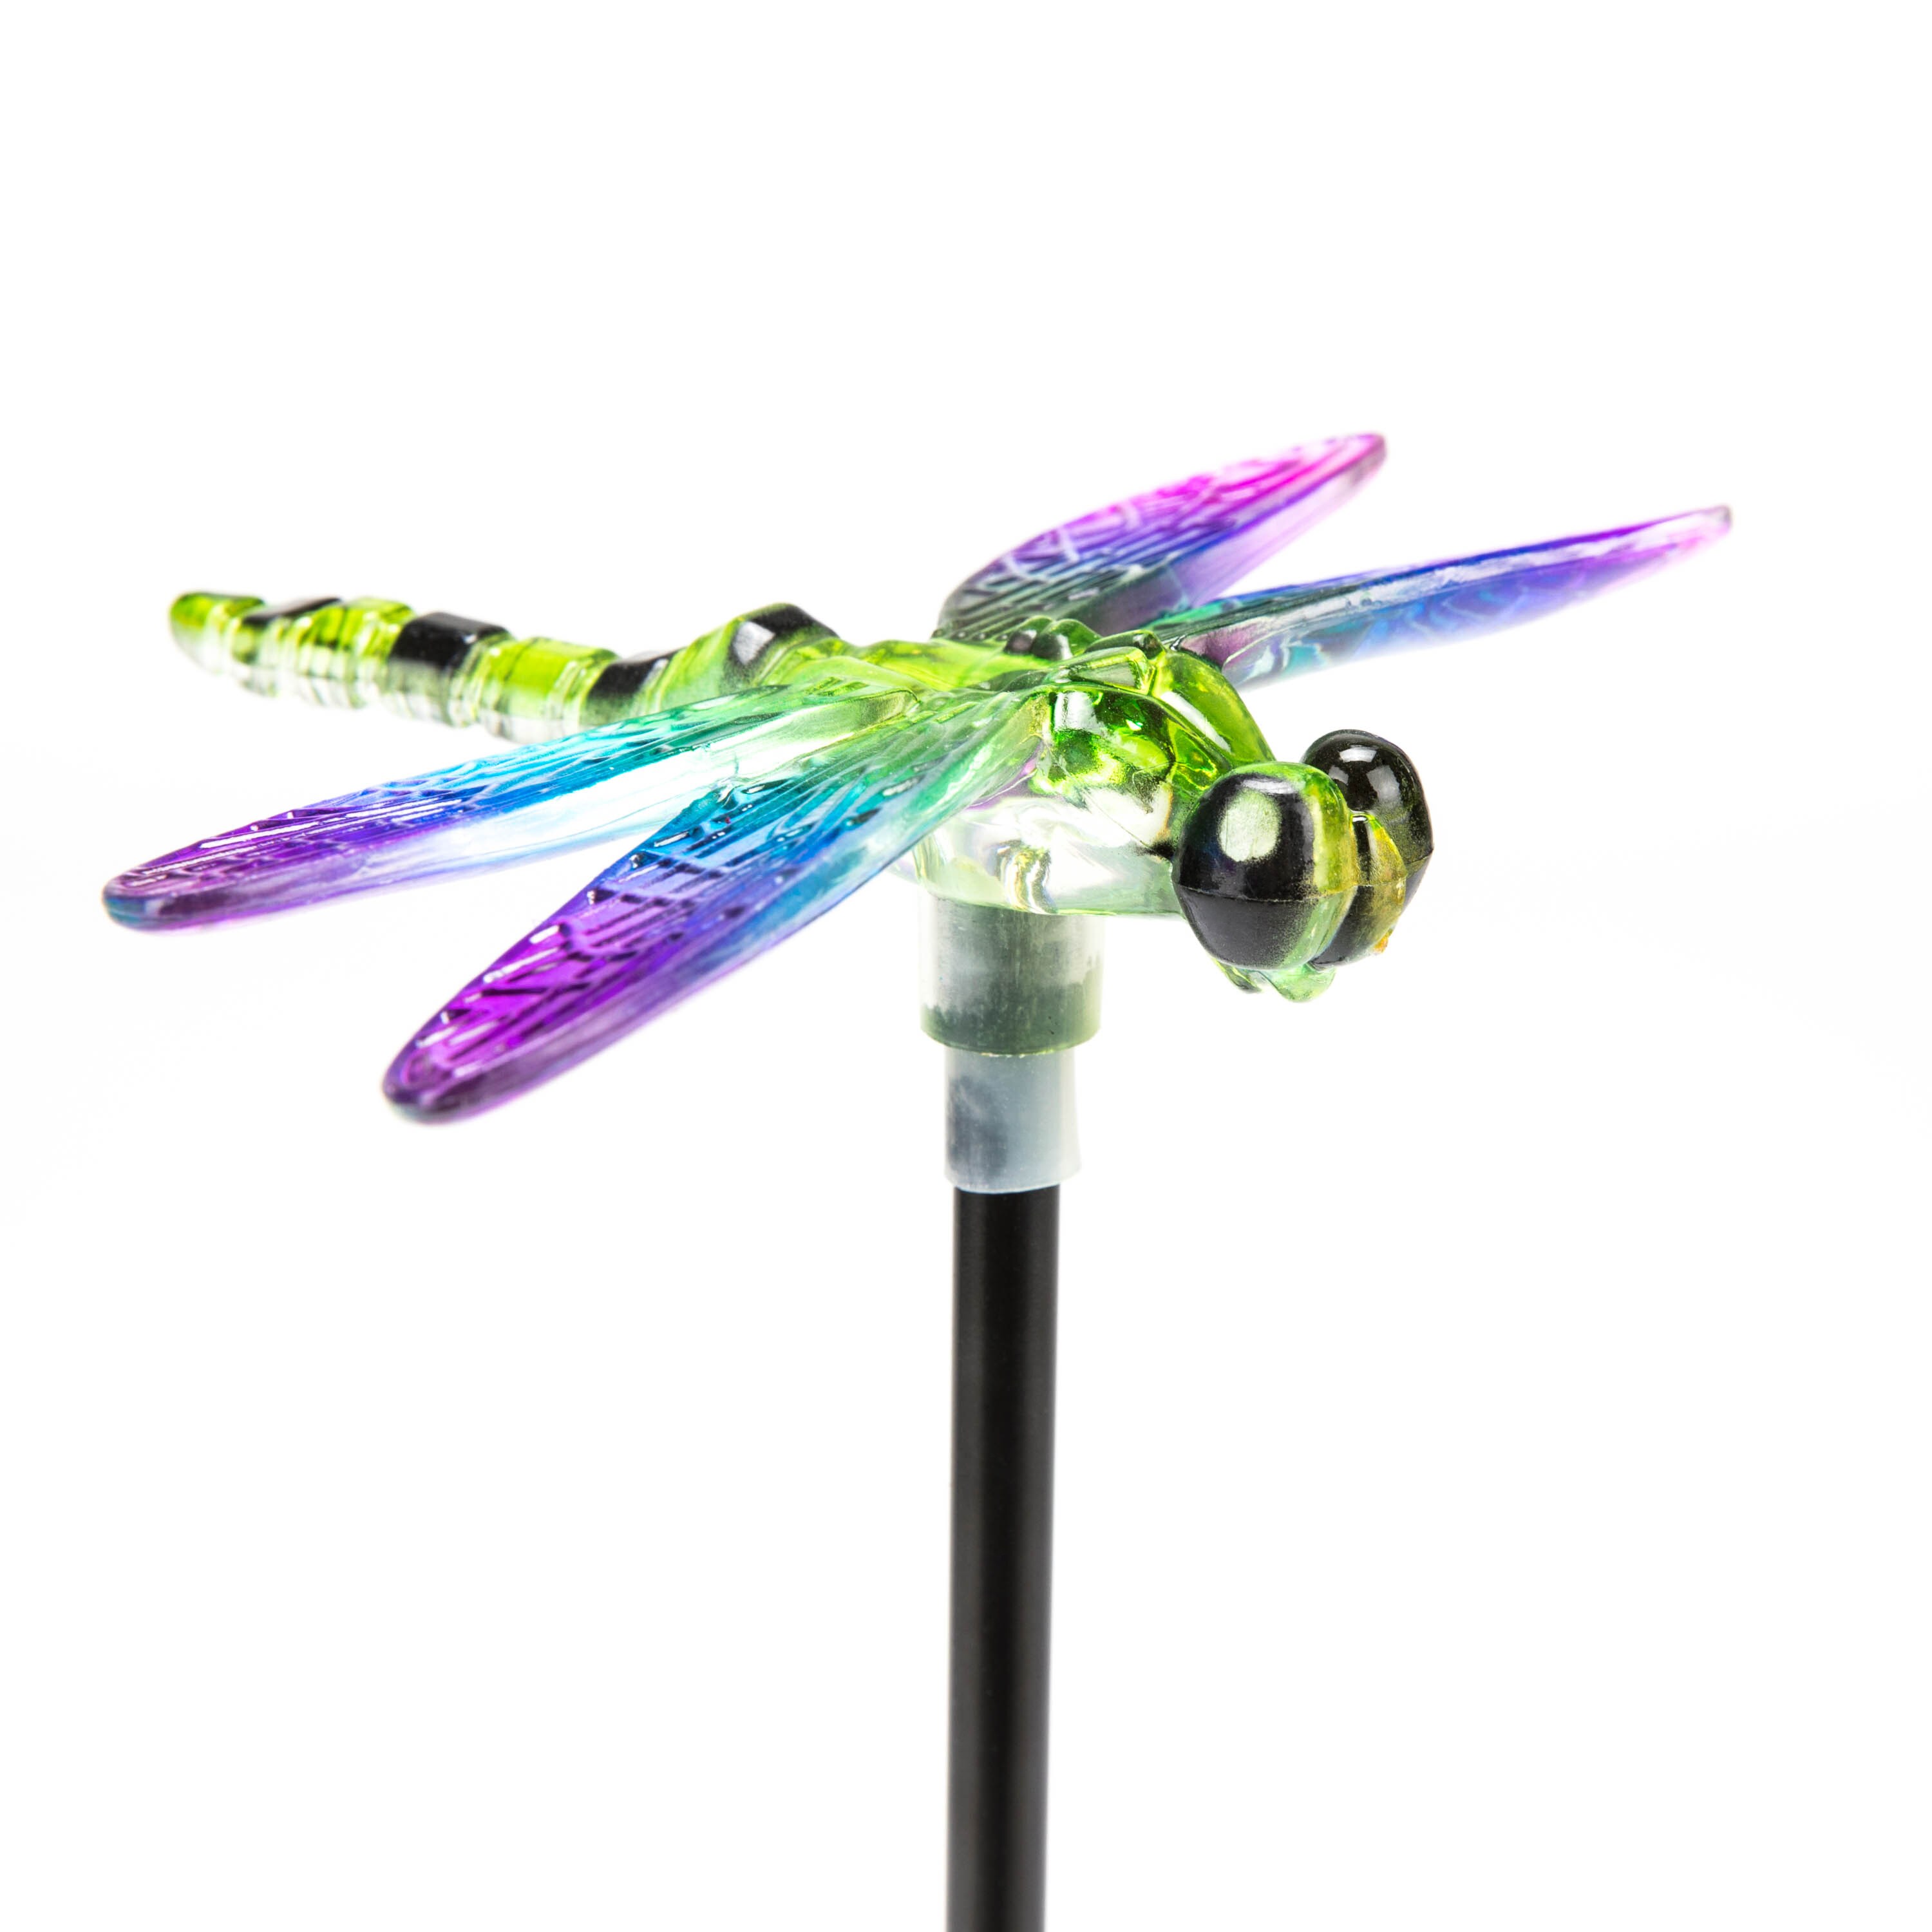 INSTALL ANYWHERE SUPER BRIGHT LED NO WIRING DRAGONFLY STAKE LIGHT GOODLAND’S 